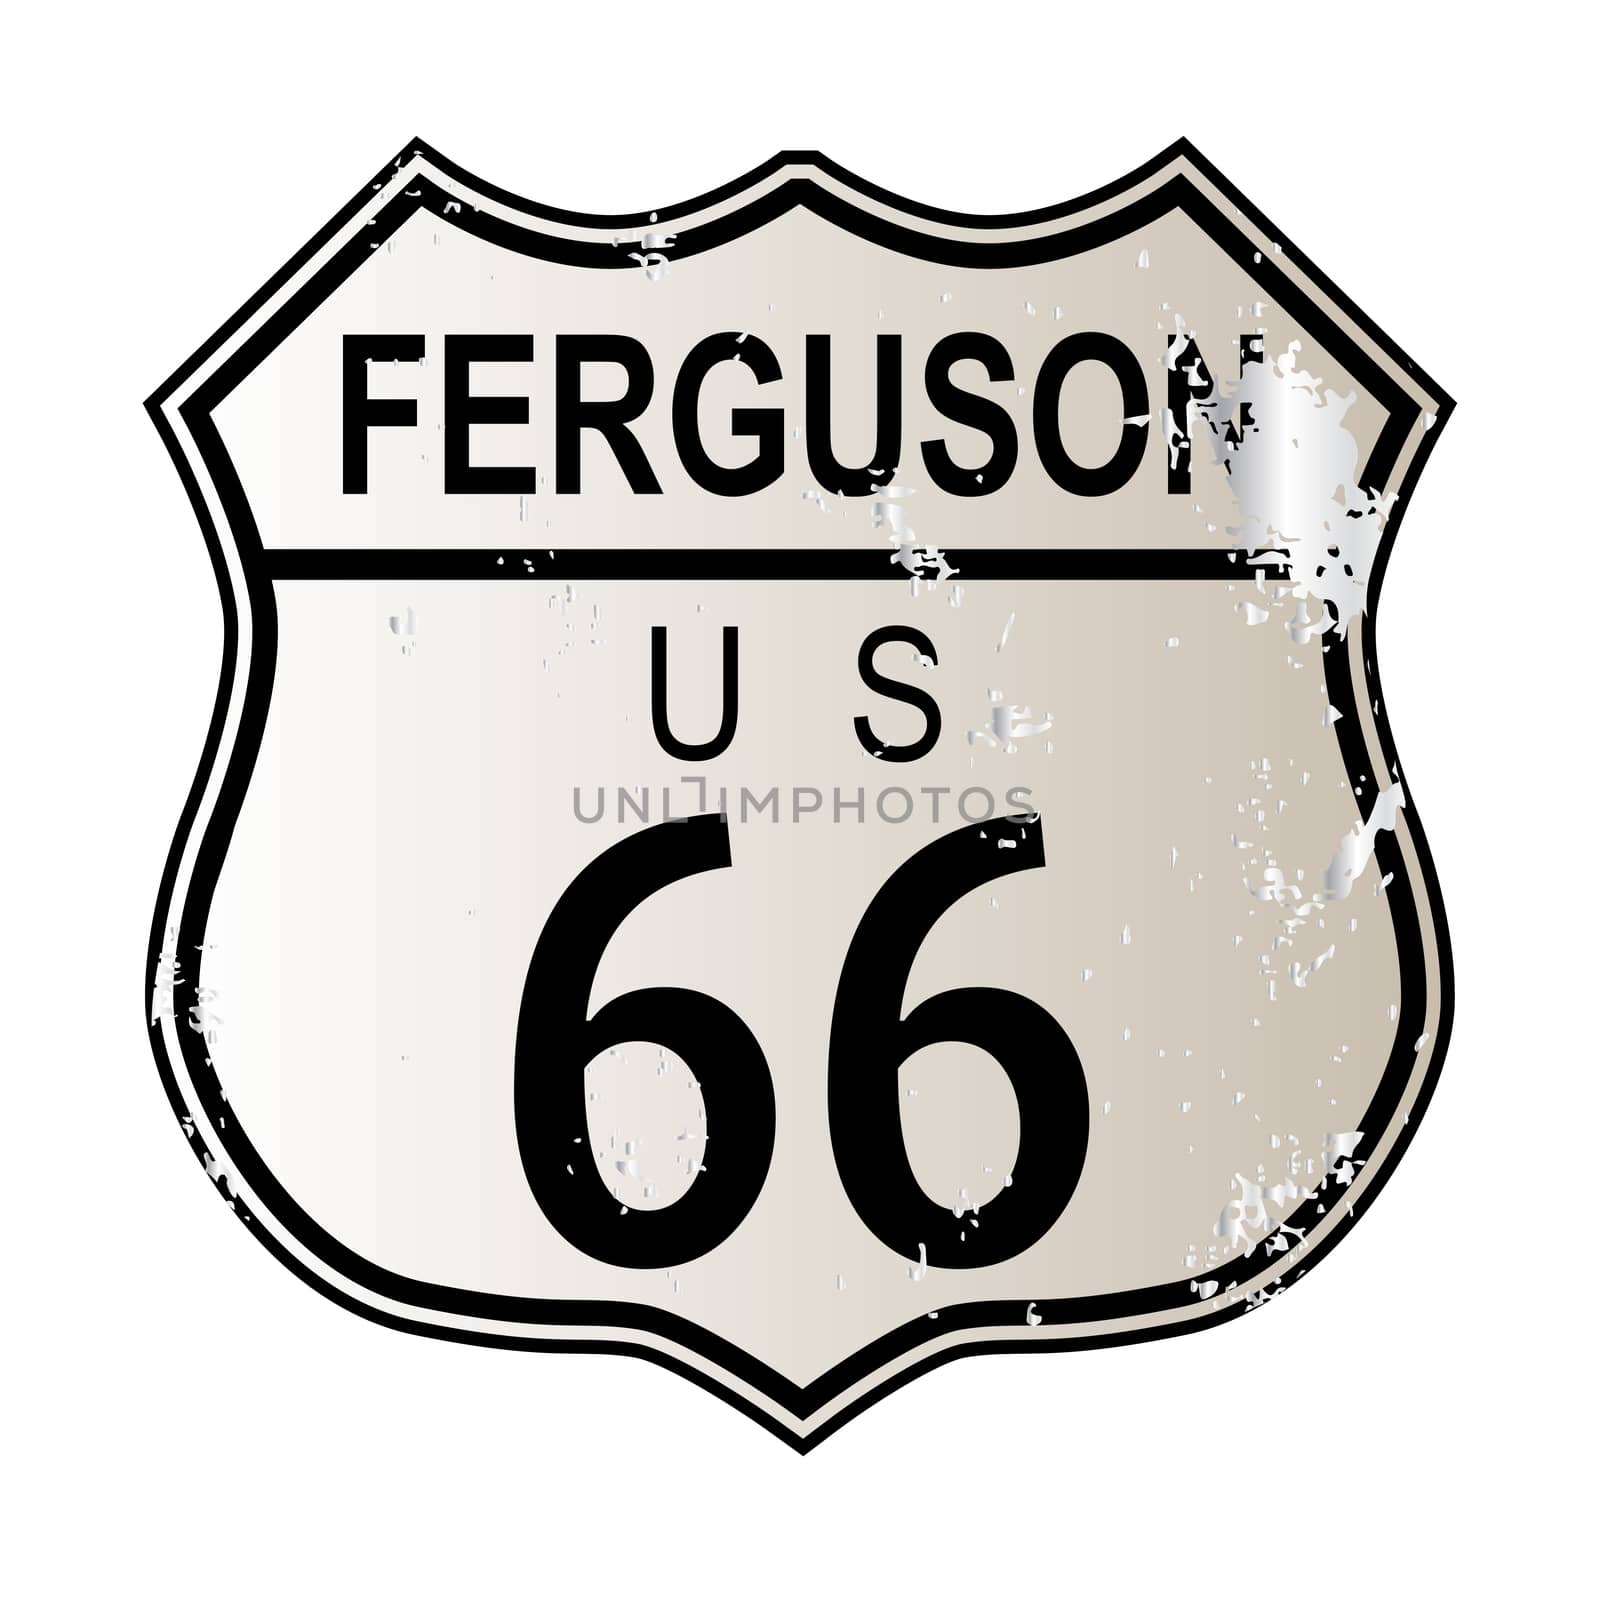 Ferguson Route 66 traffic sign over a white background and the legend ROUTE US 66